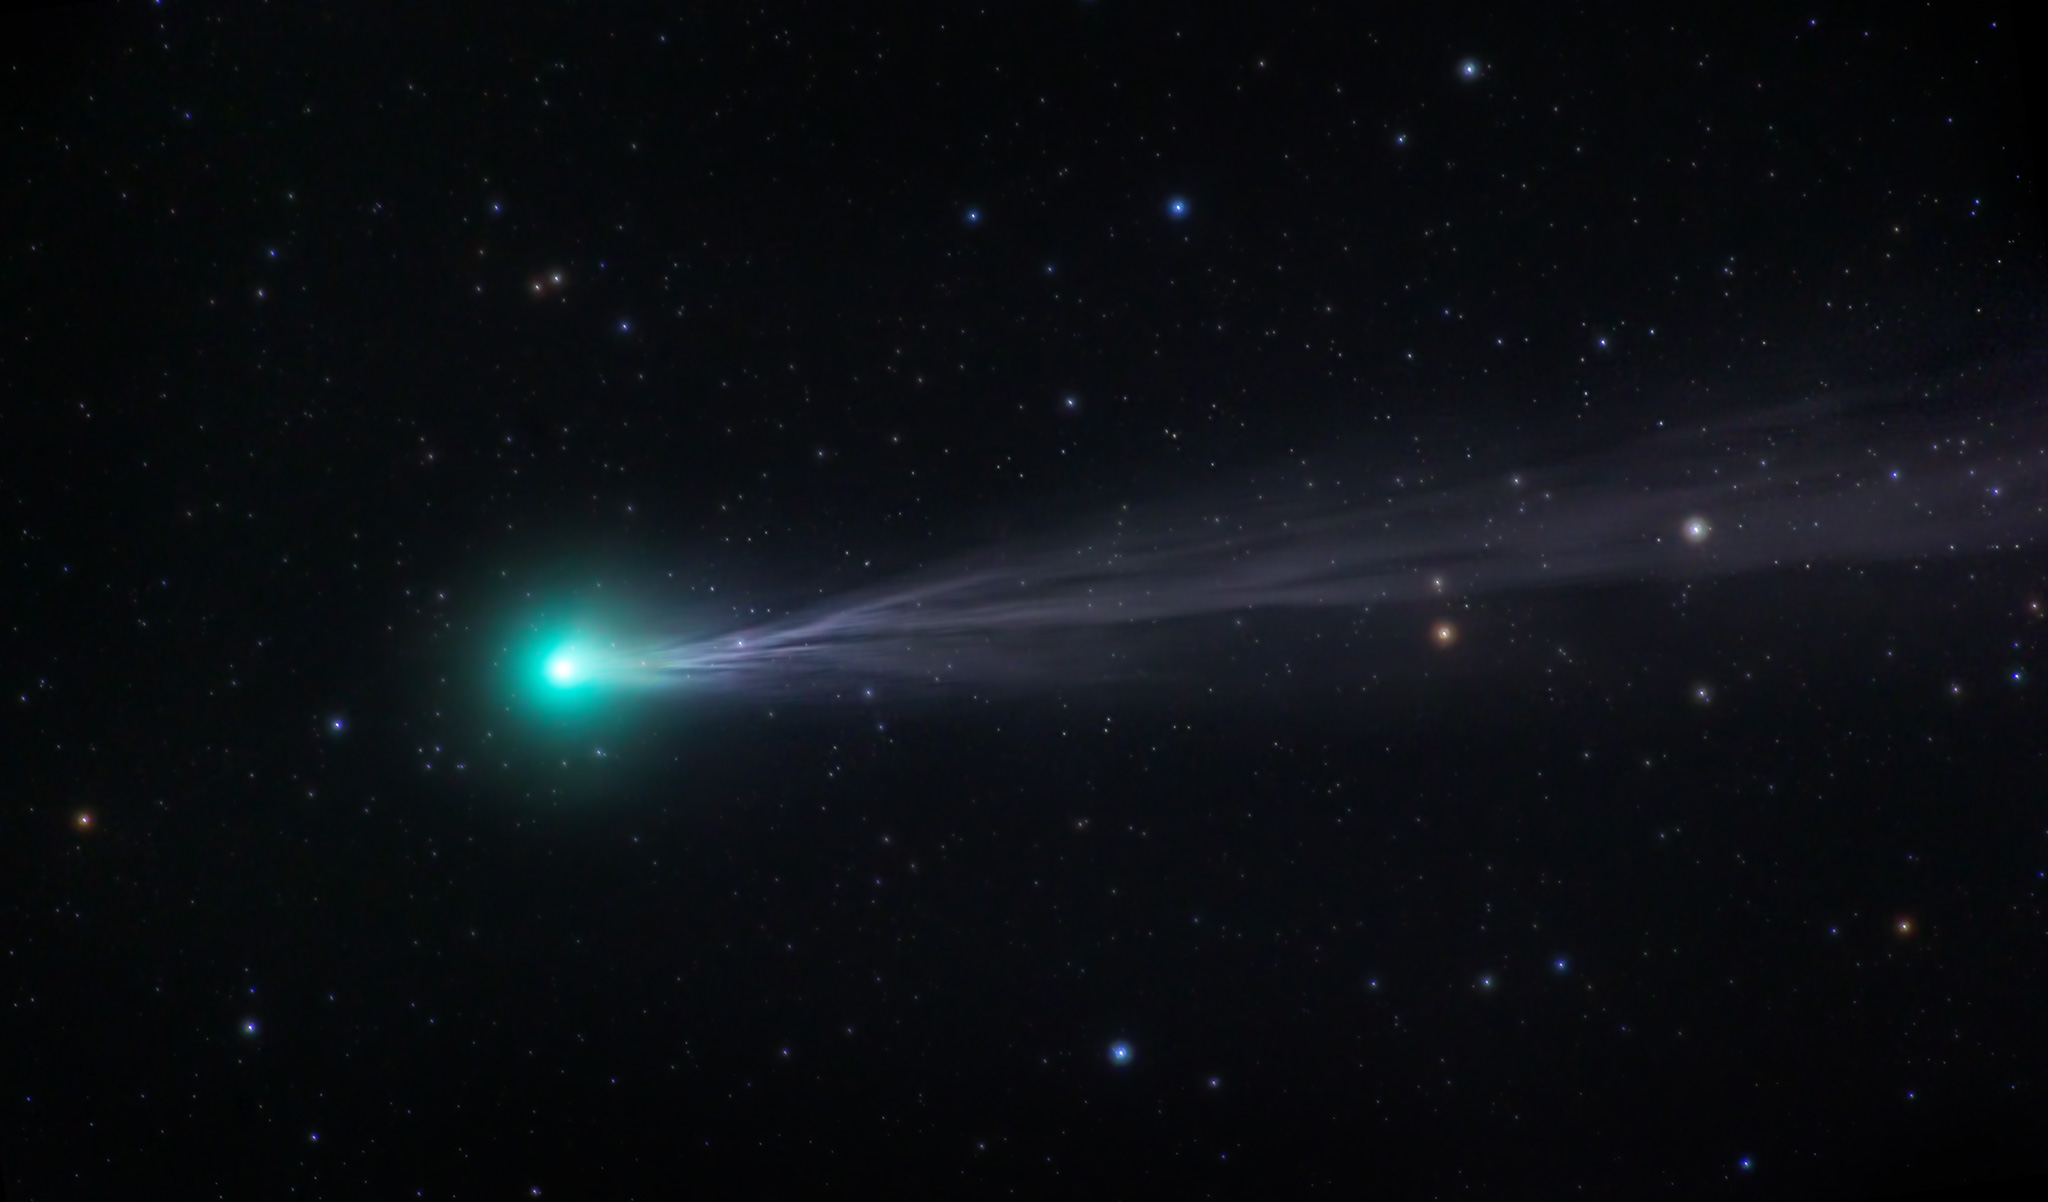 Comet Lovejoy (C/2014 Q2) by Troy Casswell